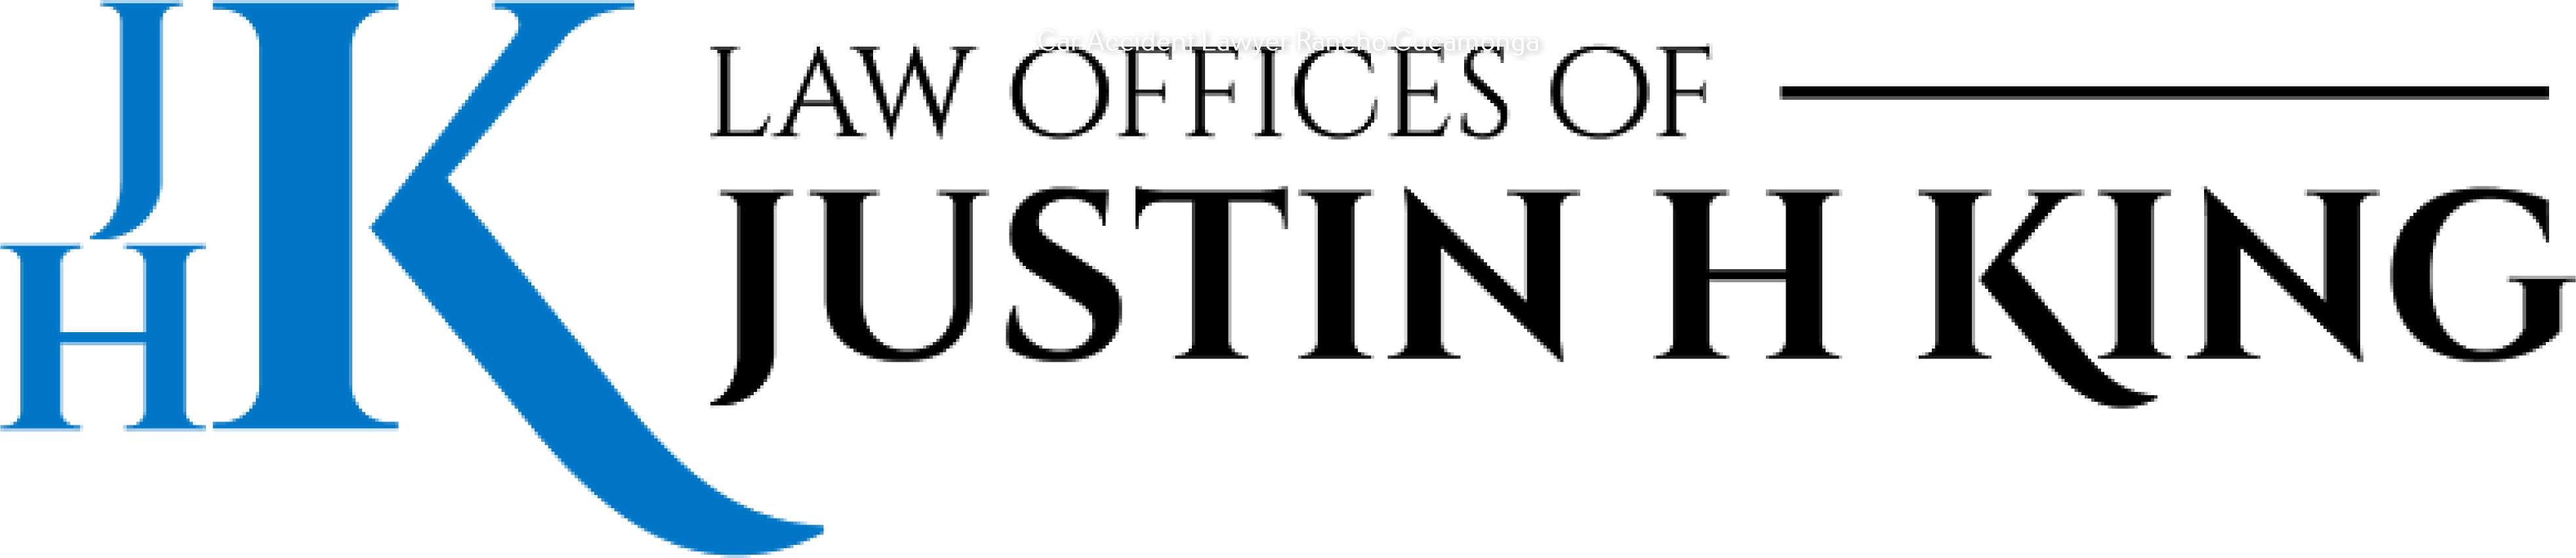 Automobile Accident Lawyer In Rancho Cucamonga